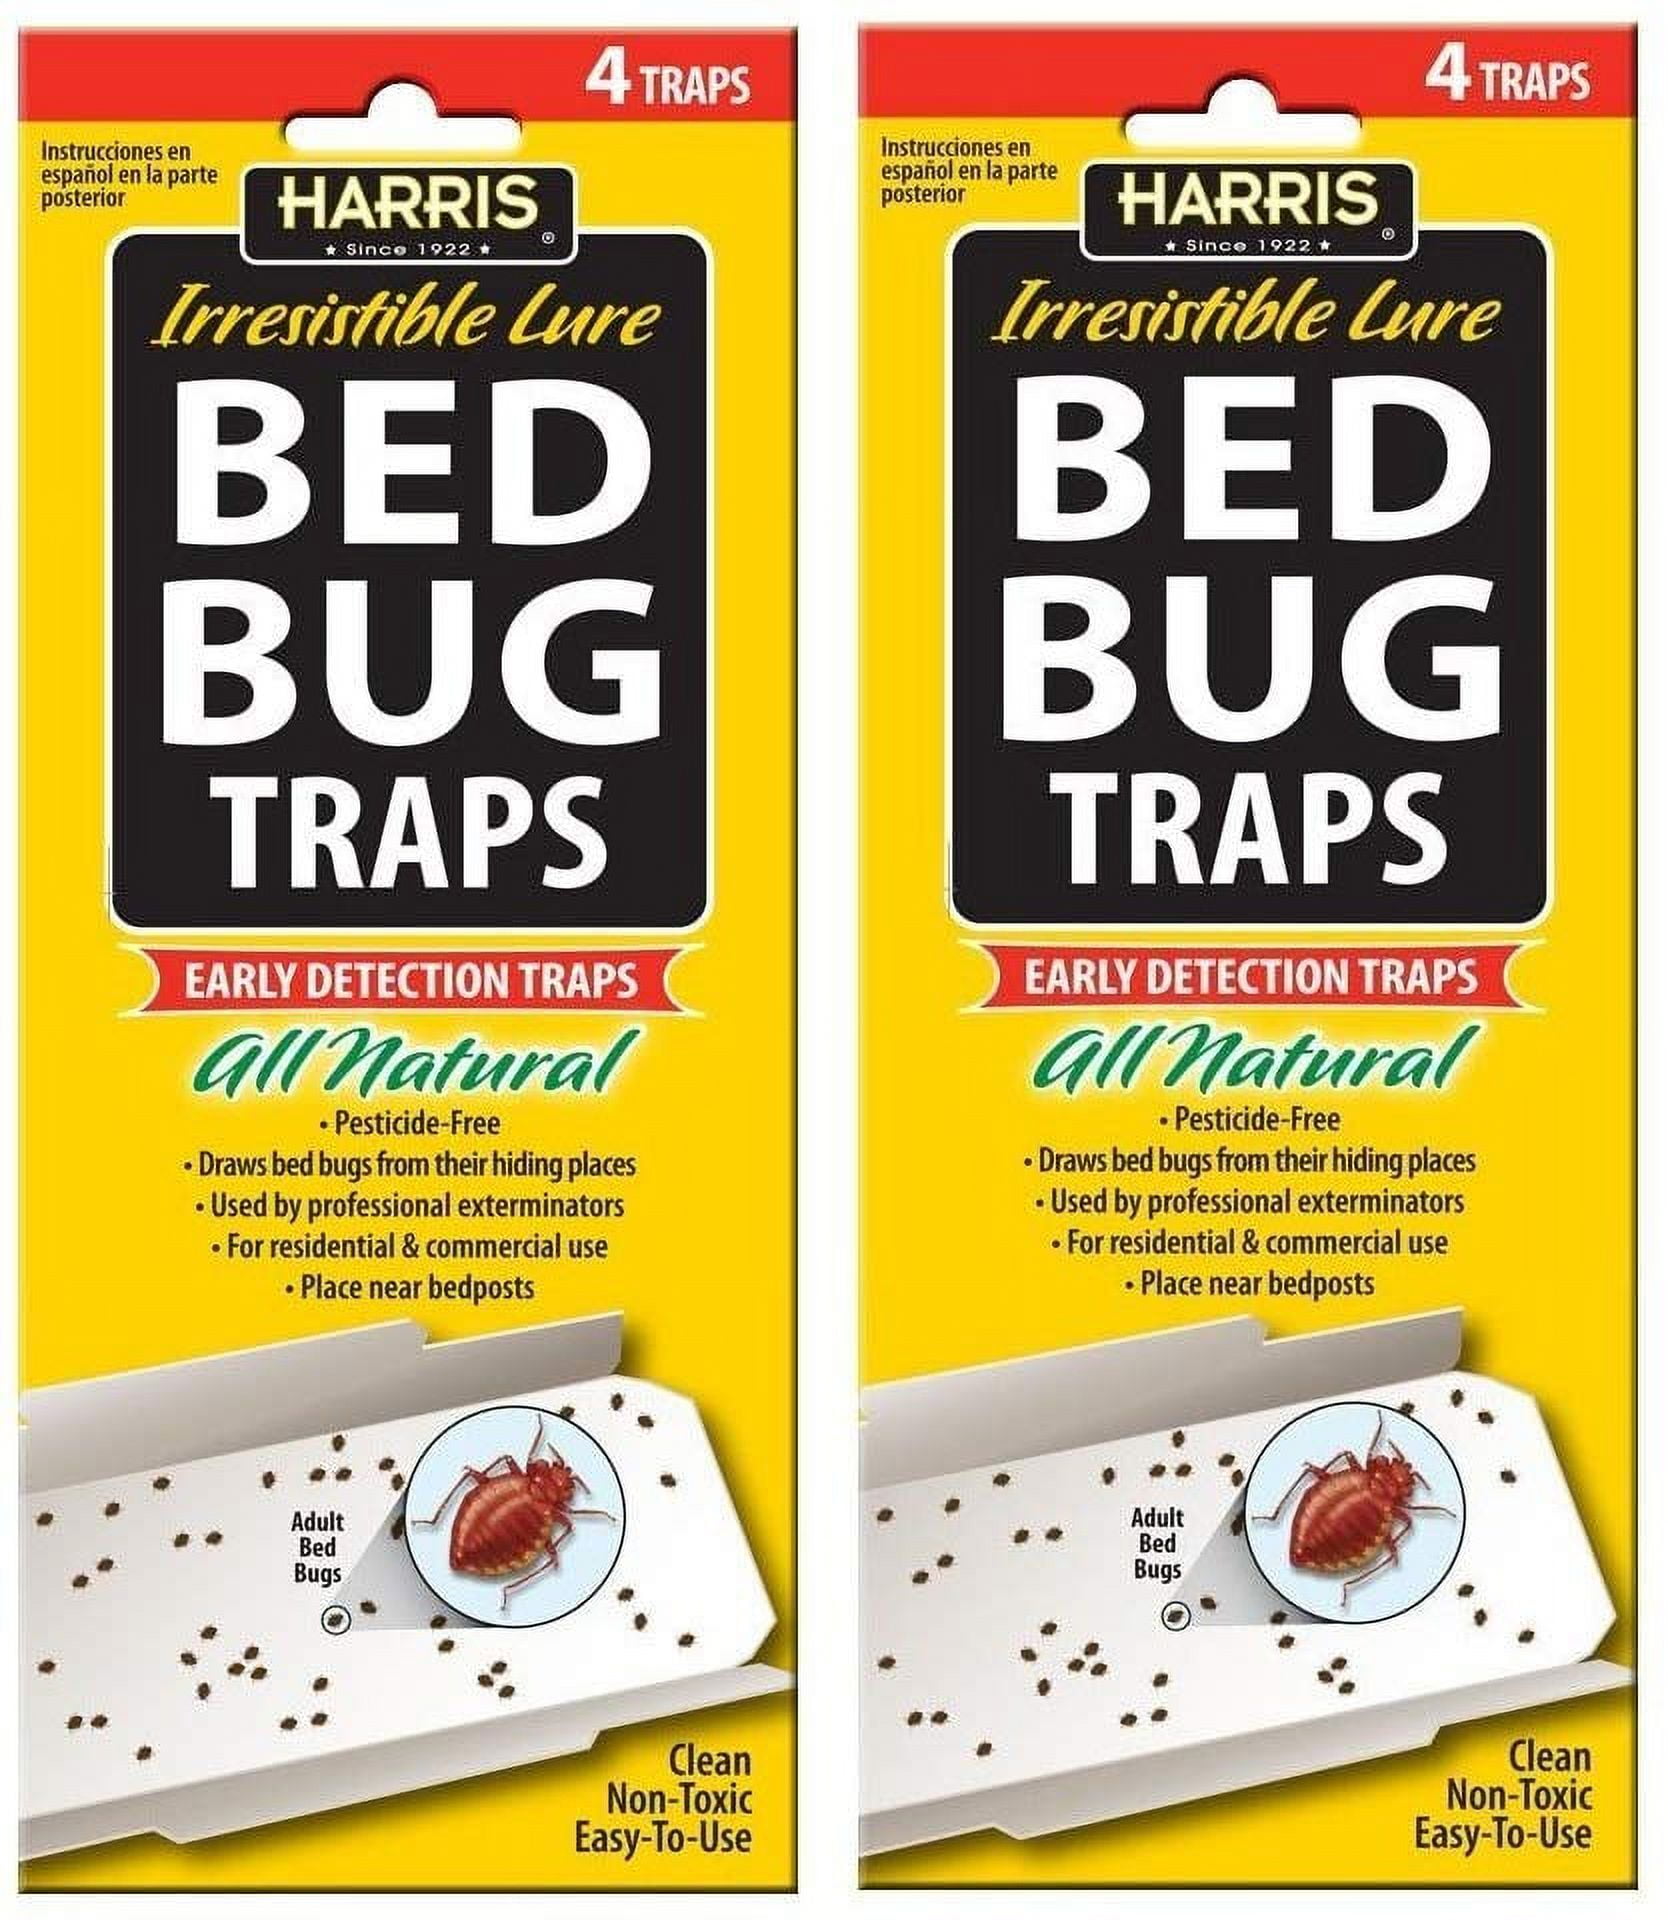 BugMD Bed Bug Trap (2 Pack, 14 Traps) - Bed Bug Prevention, Glue Traps, Insect  Trap Indoor, Bed Bug Sticky Traps - Yahoo Shopping